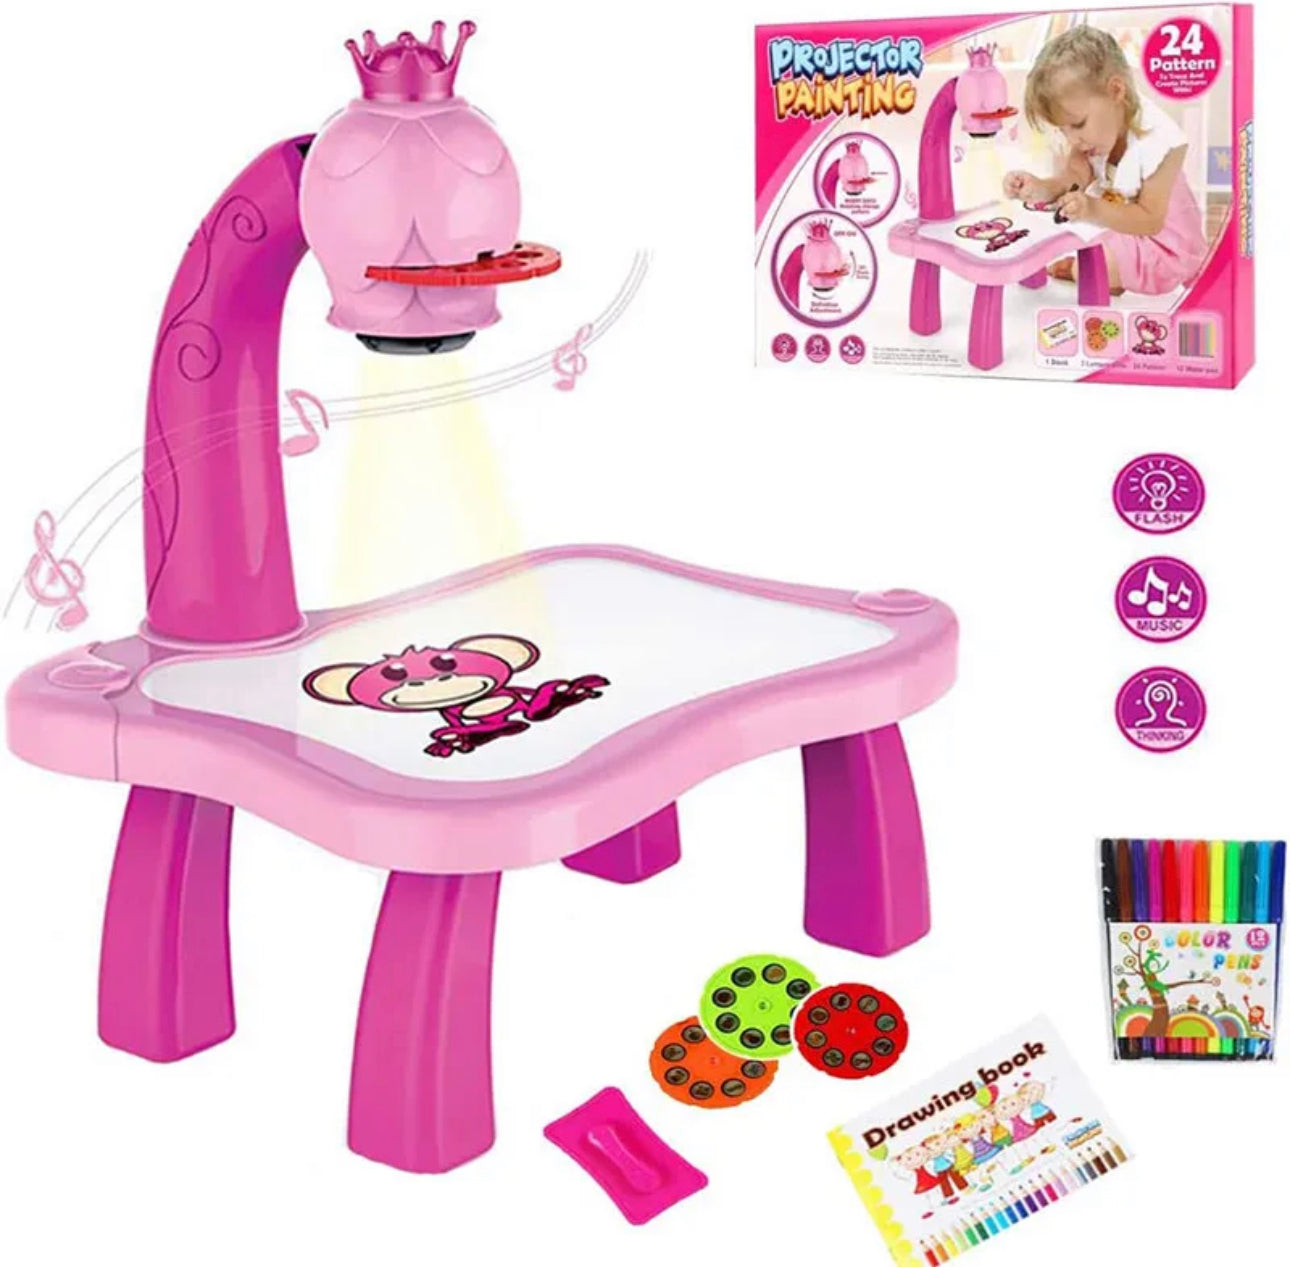 LED children’s Art Projector Drawing Table